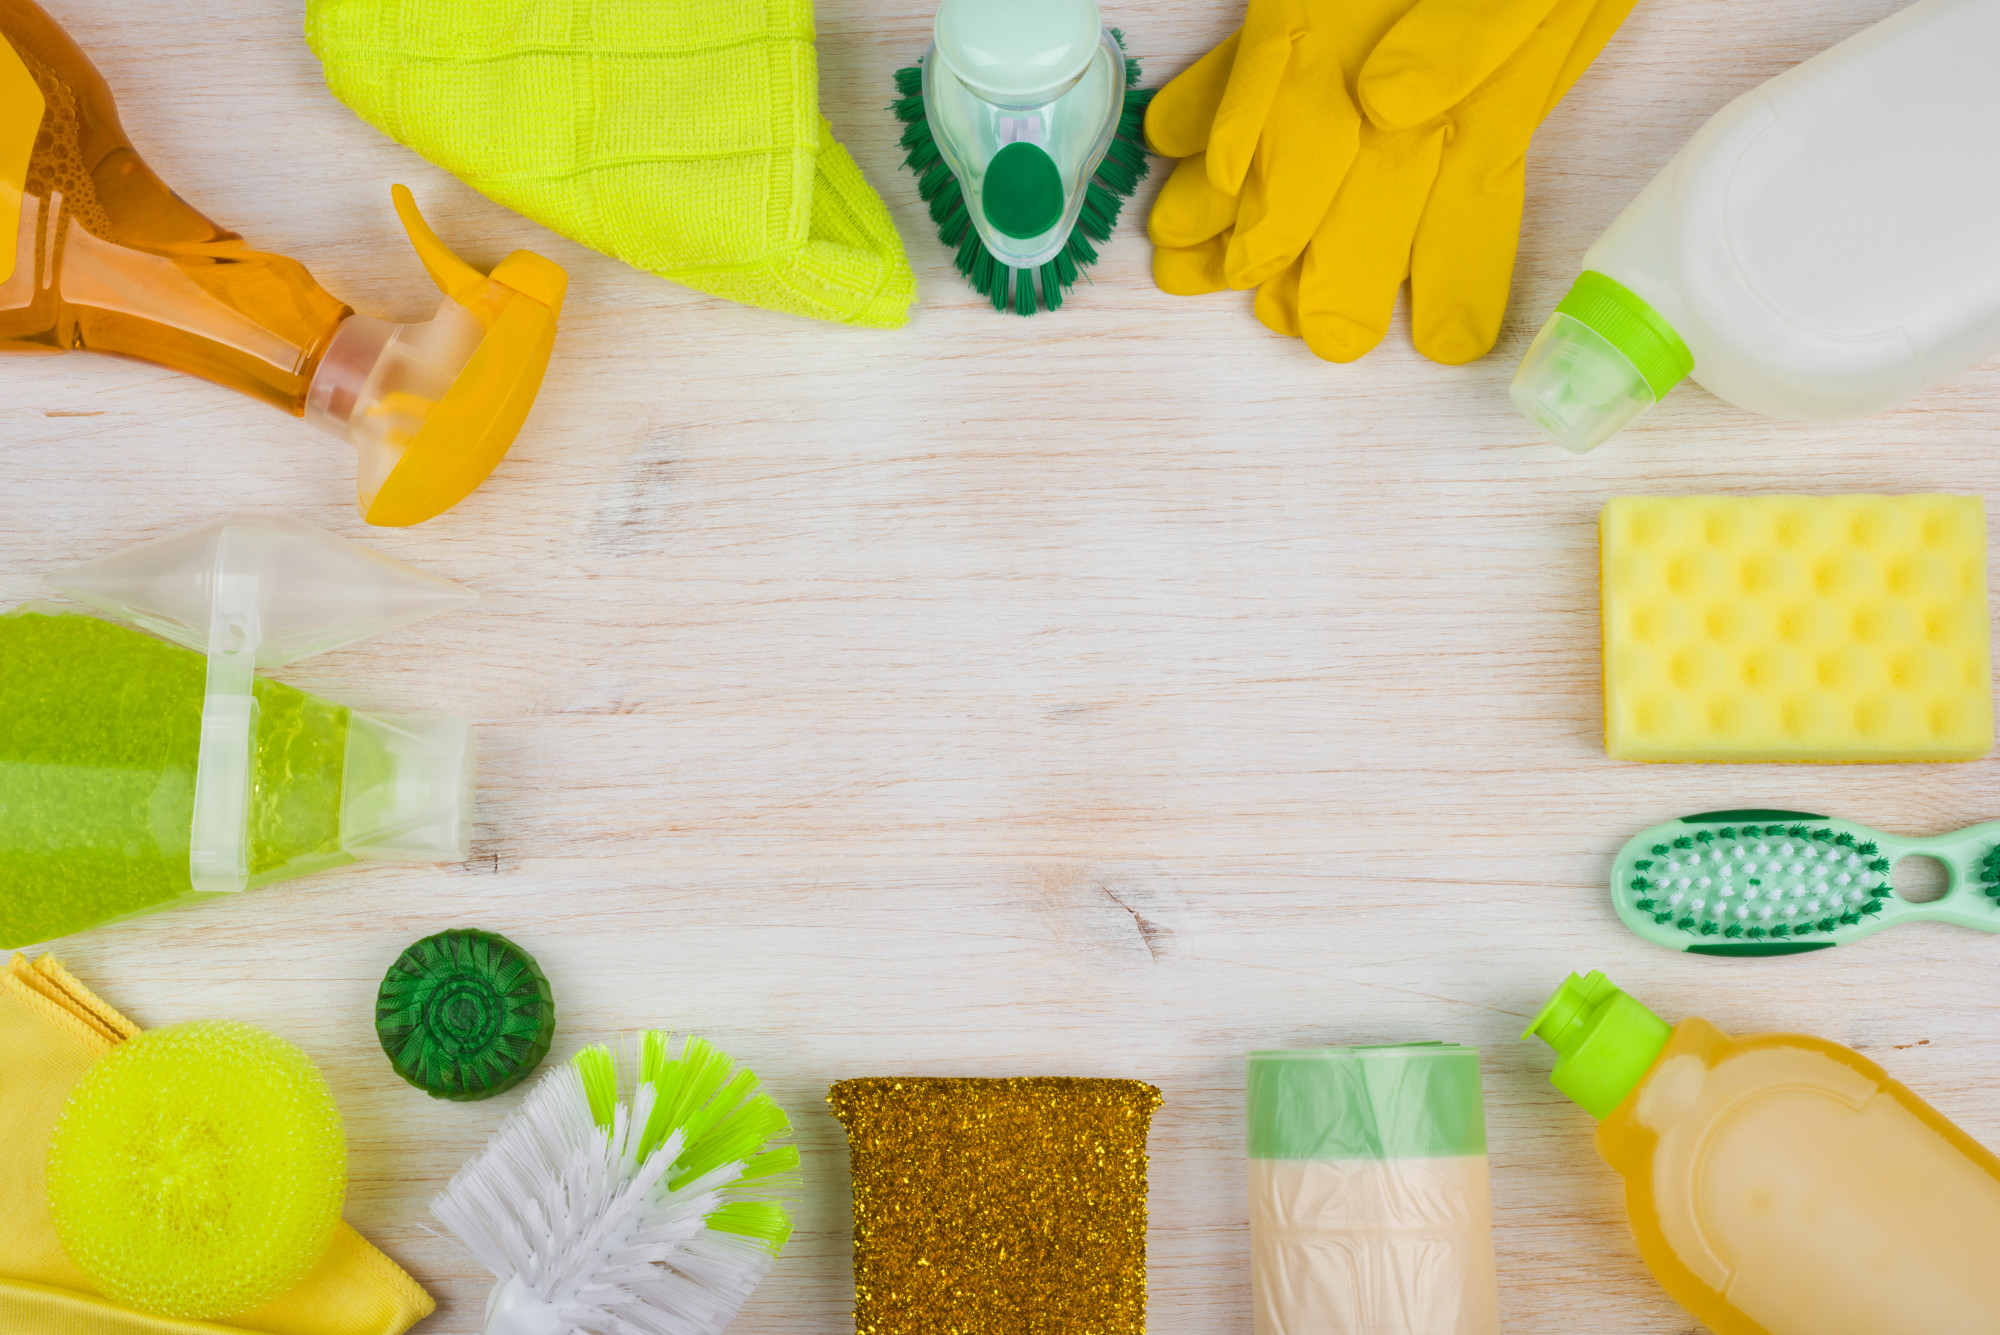 Reasons to Switch to Green Cleaning